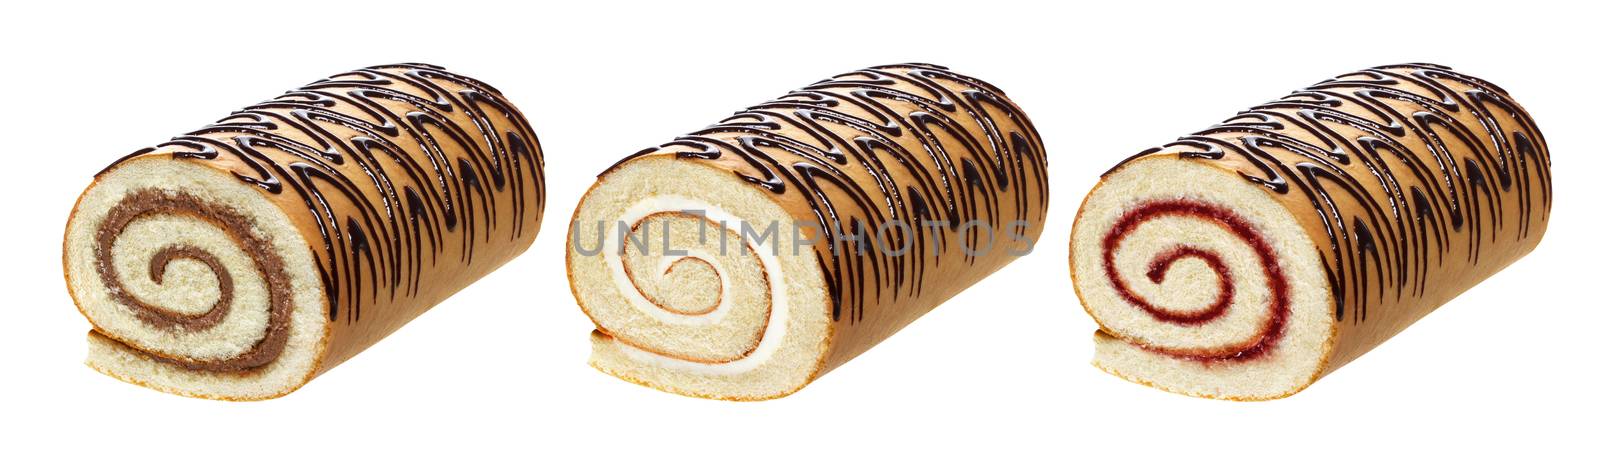 Sponge cake roll isolated on white background, with chocolate, vanilla and berry cream, different swiss rolls collection by xamtiw